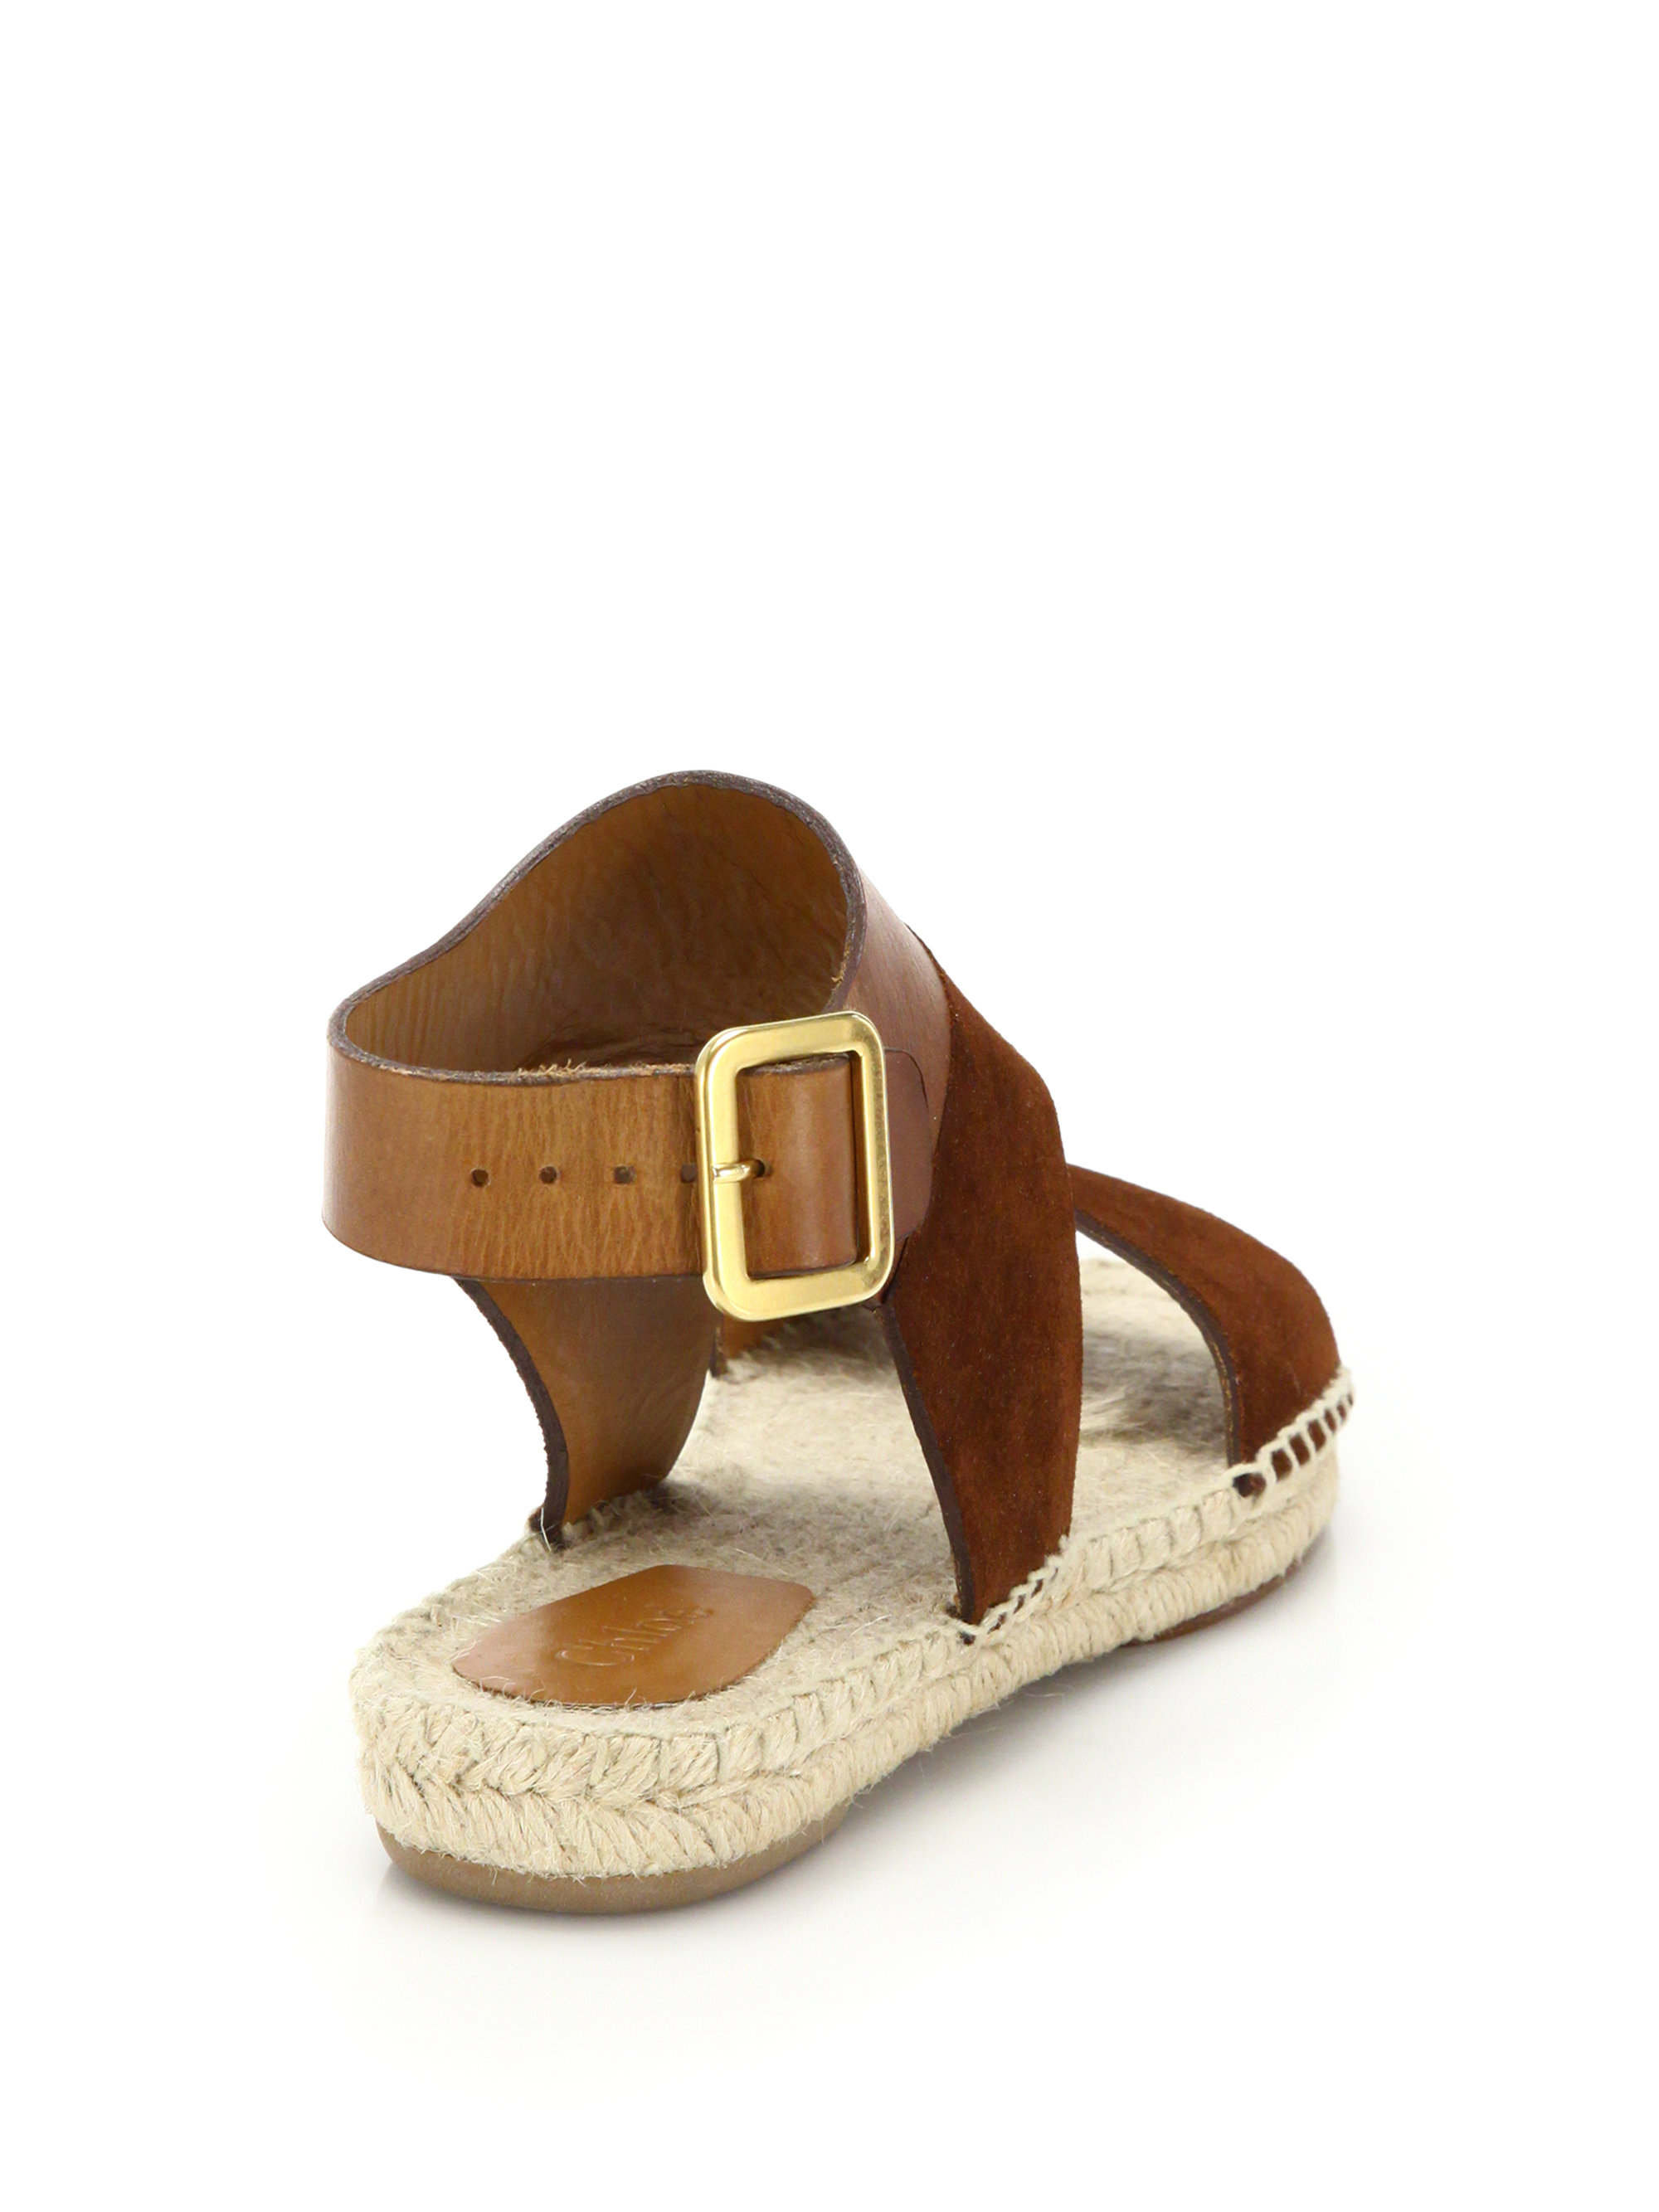 Chloé Suede & Leather Espadrille Flat Sandals in Brown - Lyst